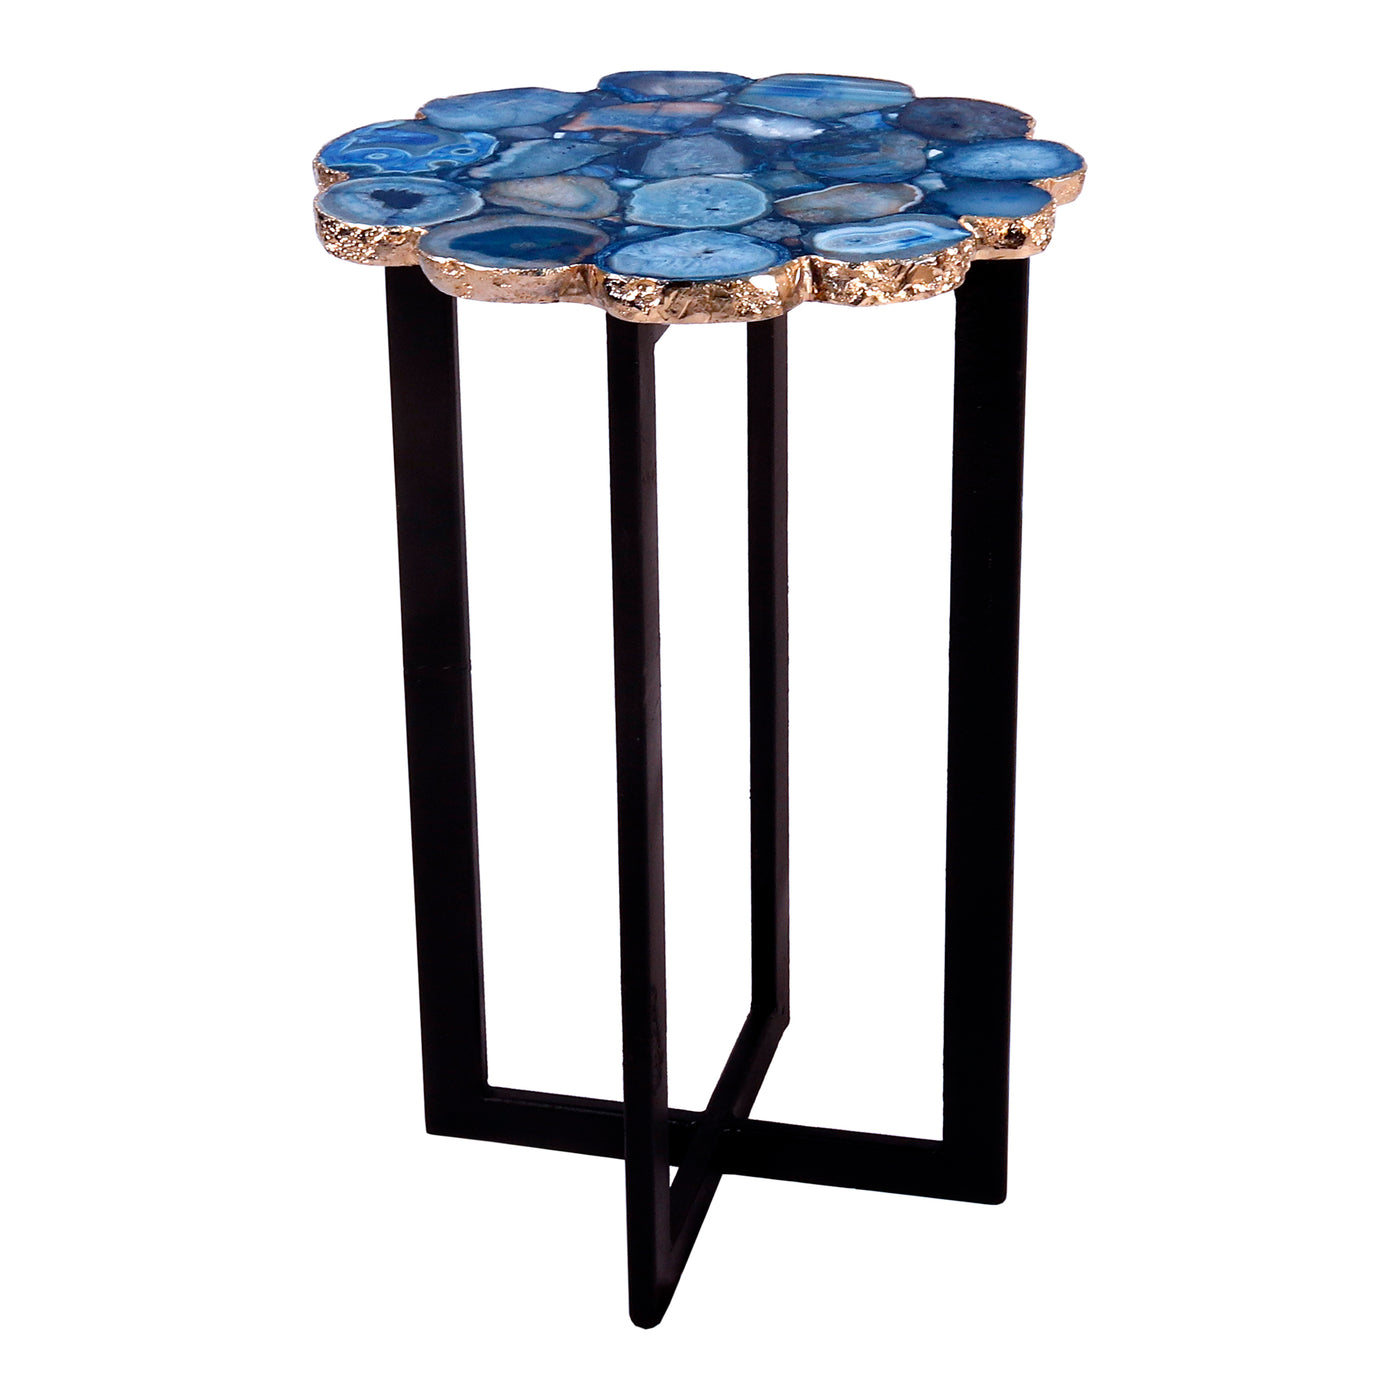 The Azul Agate accent table is one of our bestsellers for a reason. Its tabletop is constructed from beautiful blue agate ...